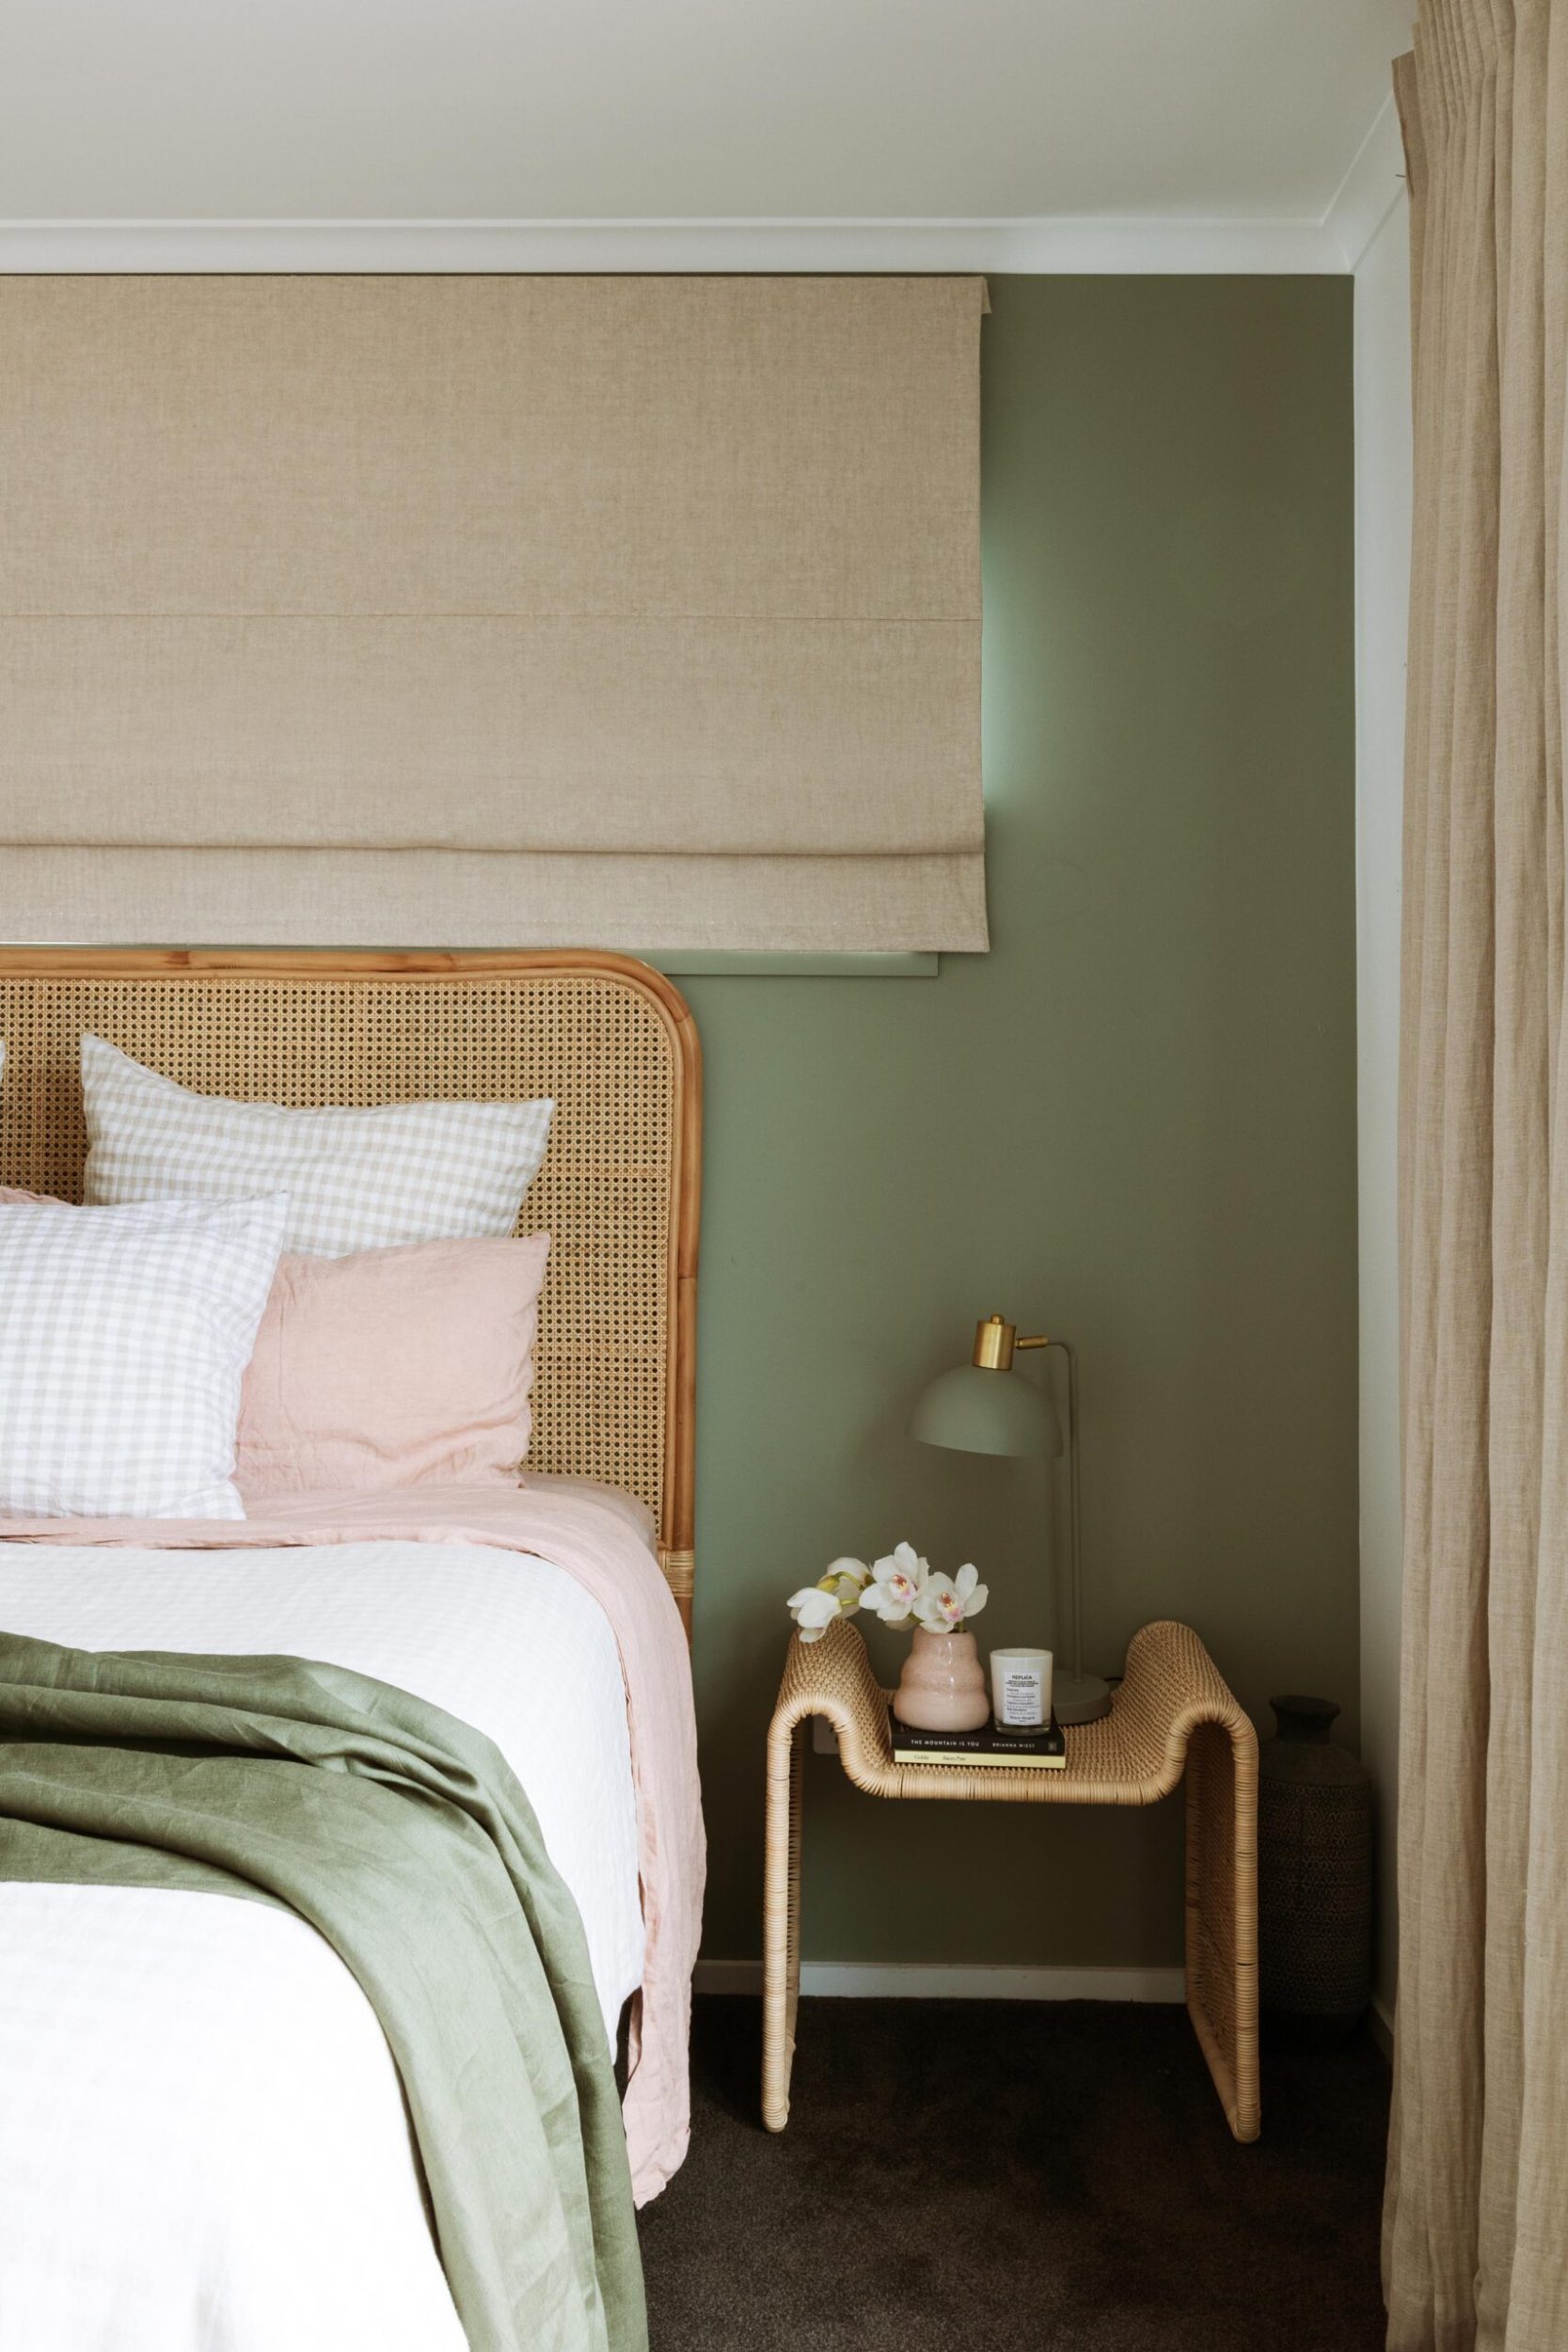 A rattan headboard leaning against a light green wall, a rattan side table and white and blush pink linen dress the bed